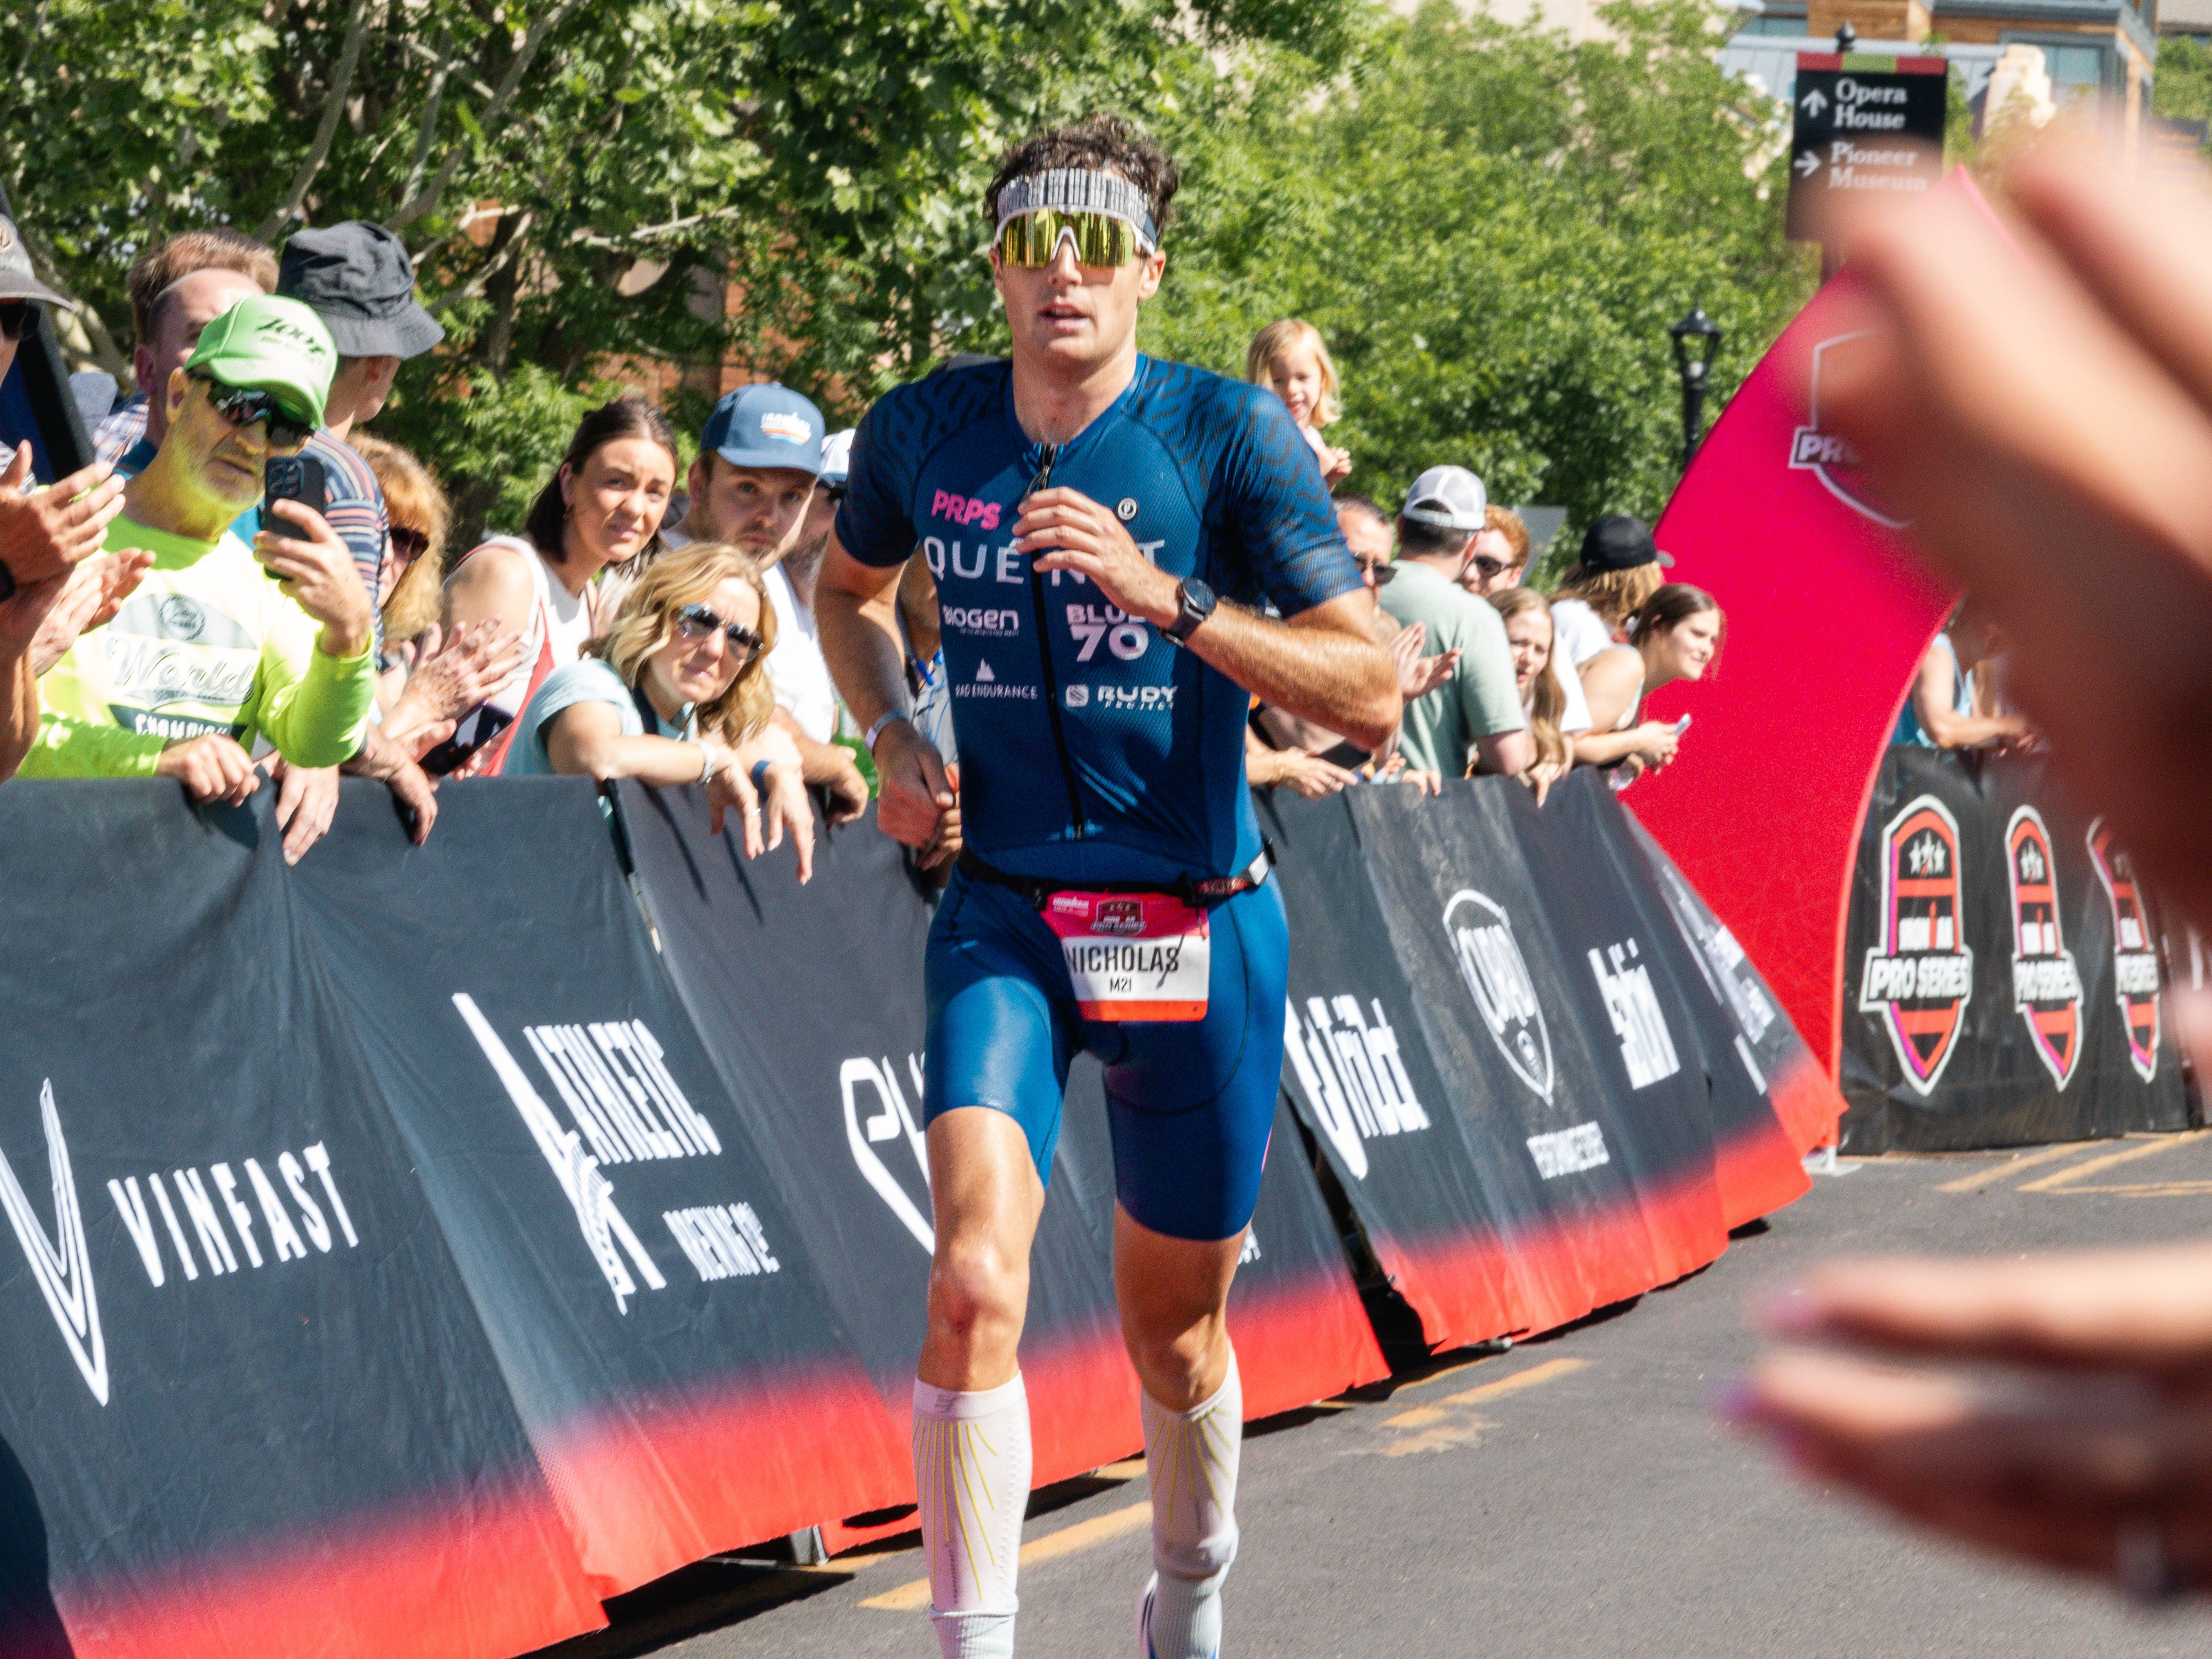 Meet Nick: A Pro Triathlete Taking the World by Storm